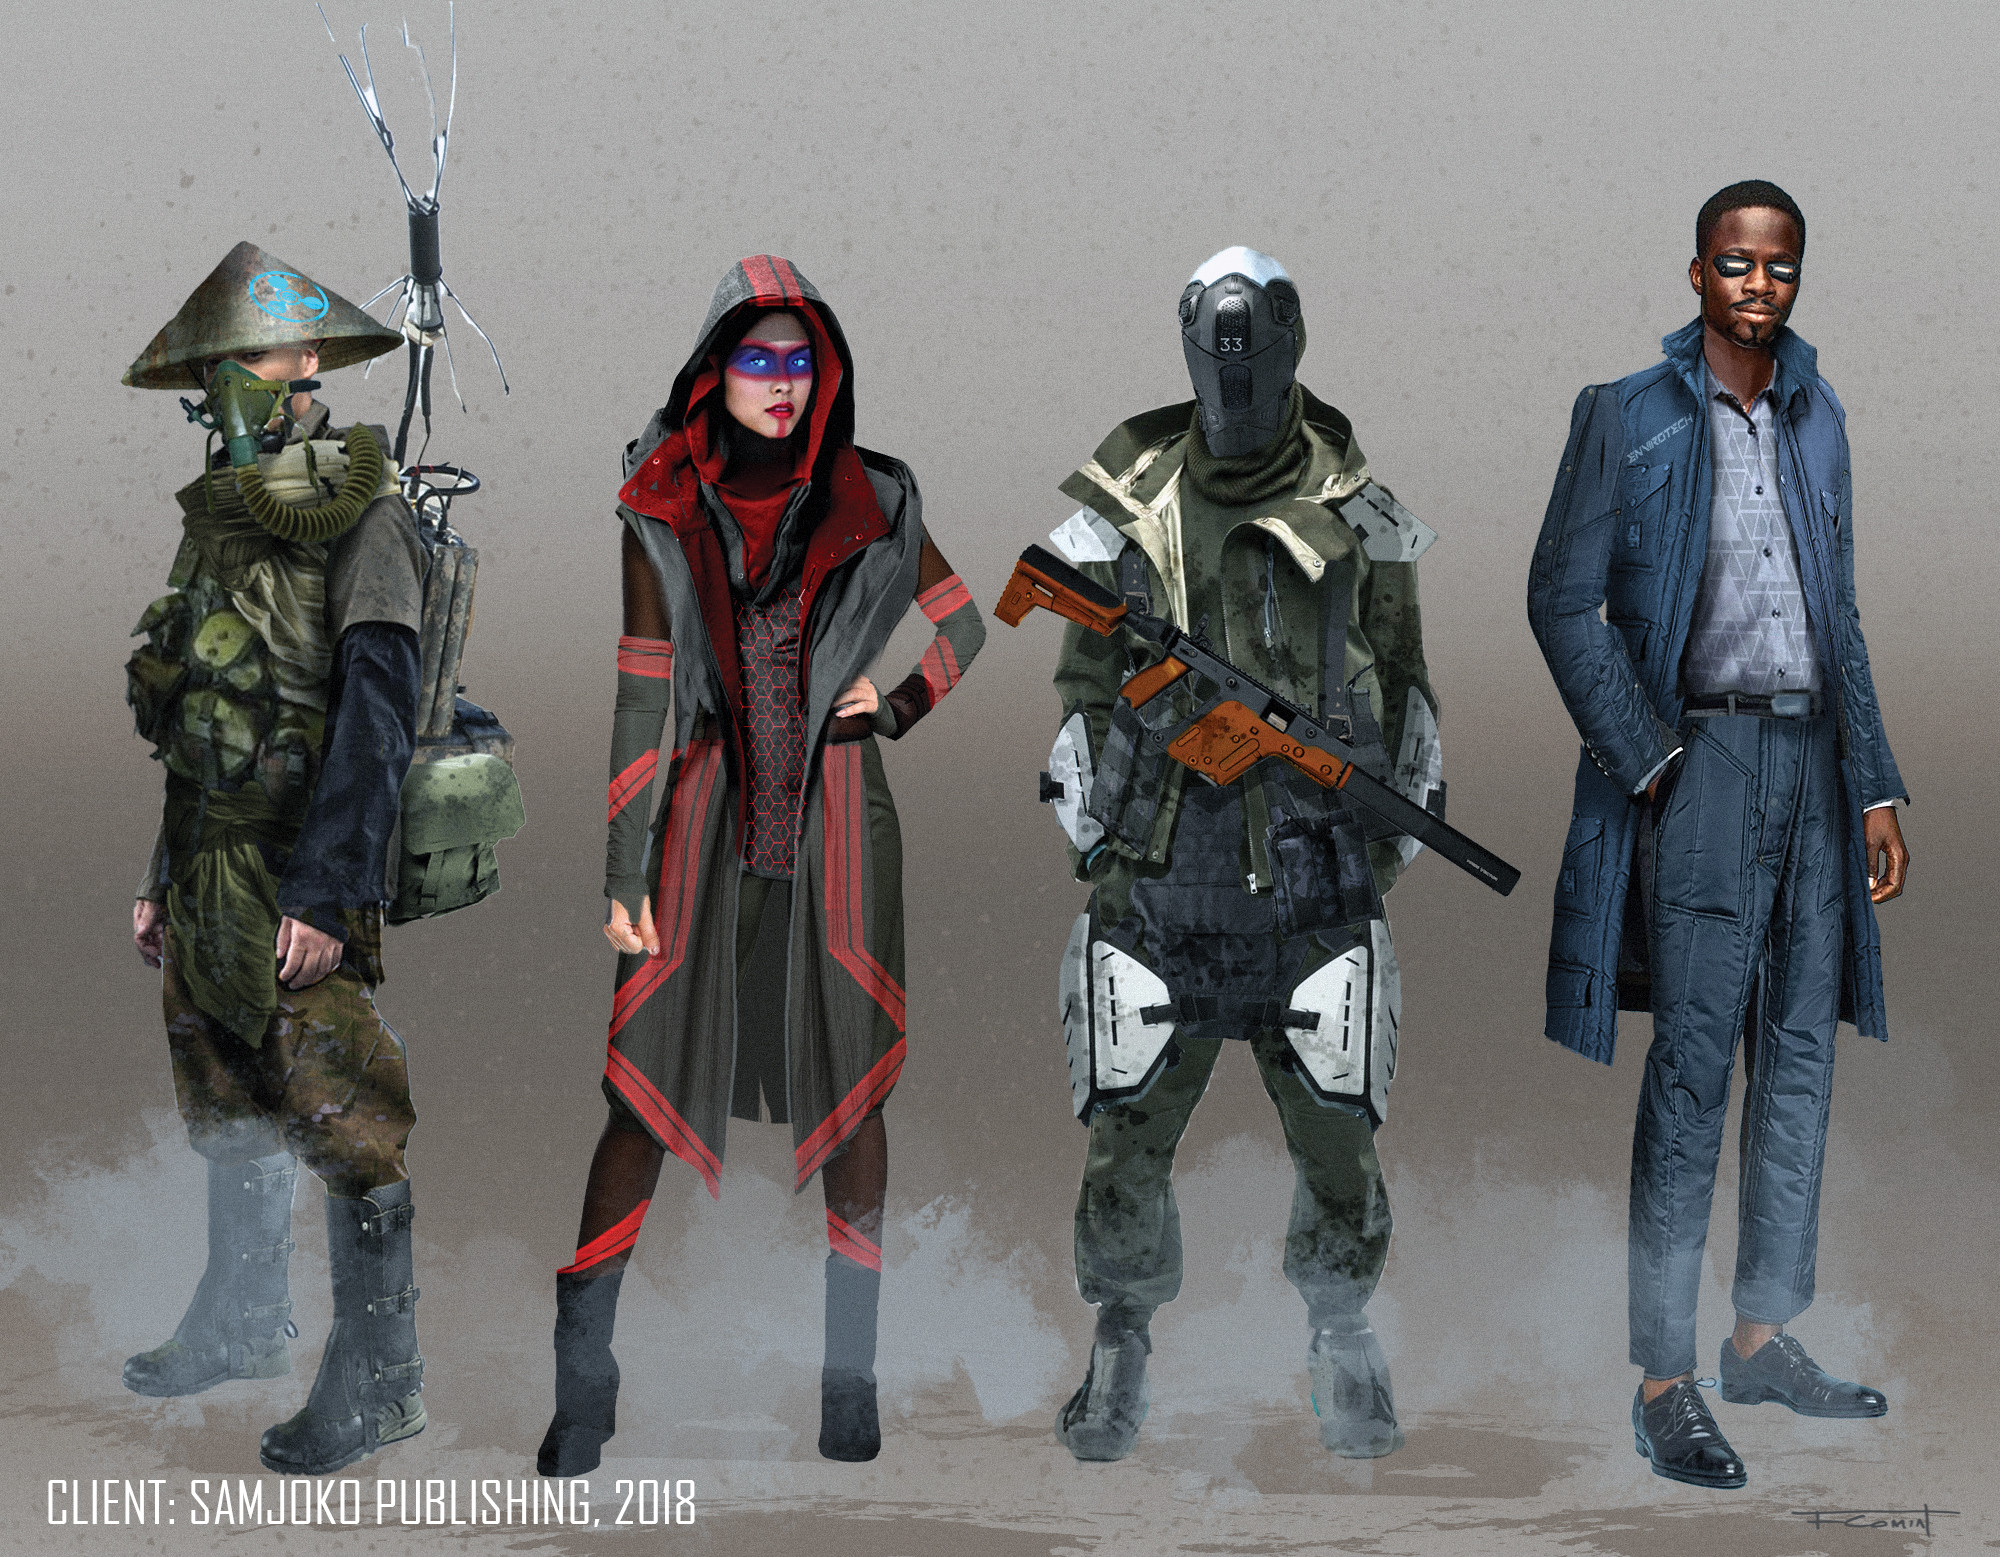 Character wardrobe concepts for Samjoko Publishing's roleplaying game Hack the Planet